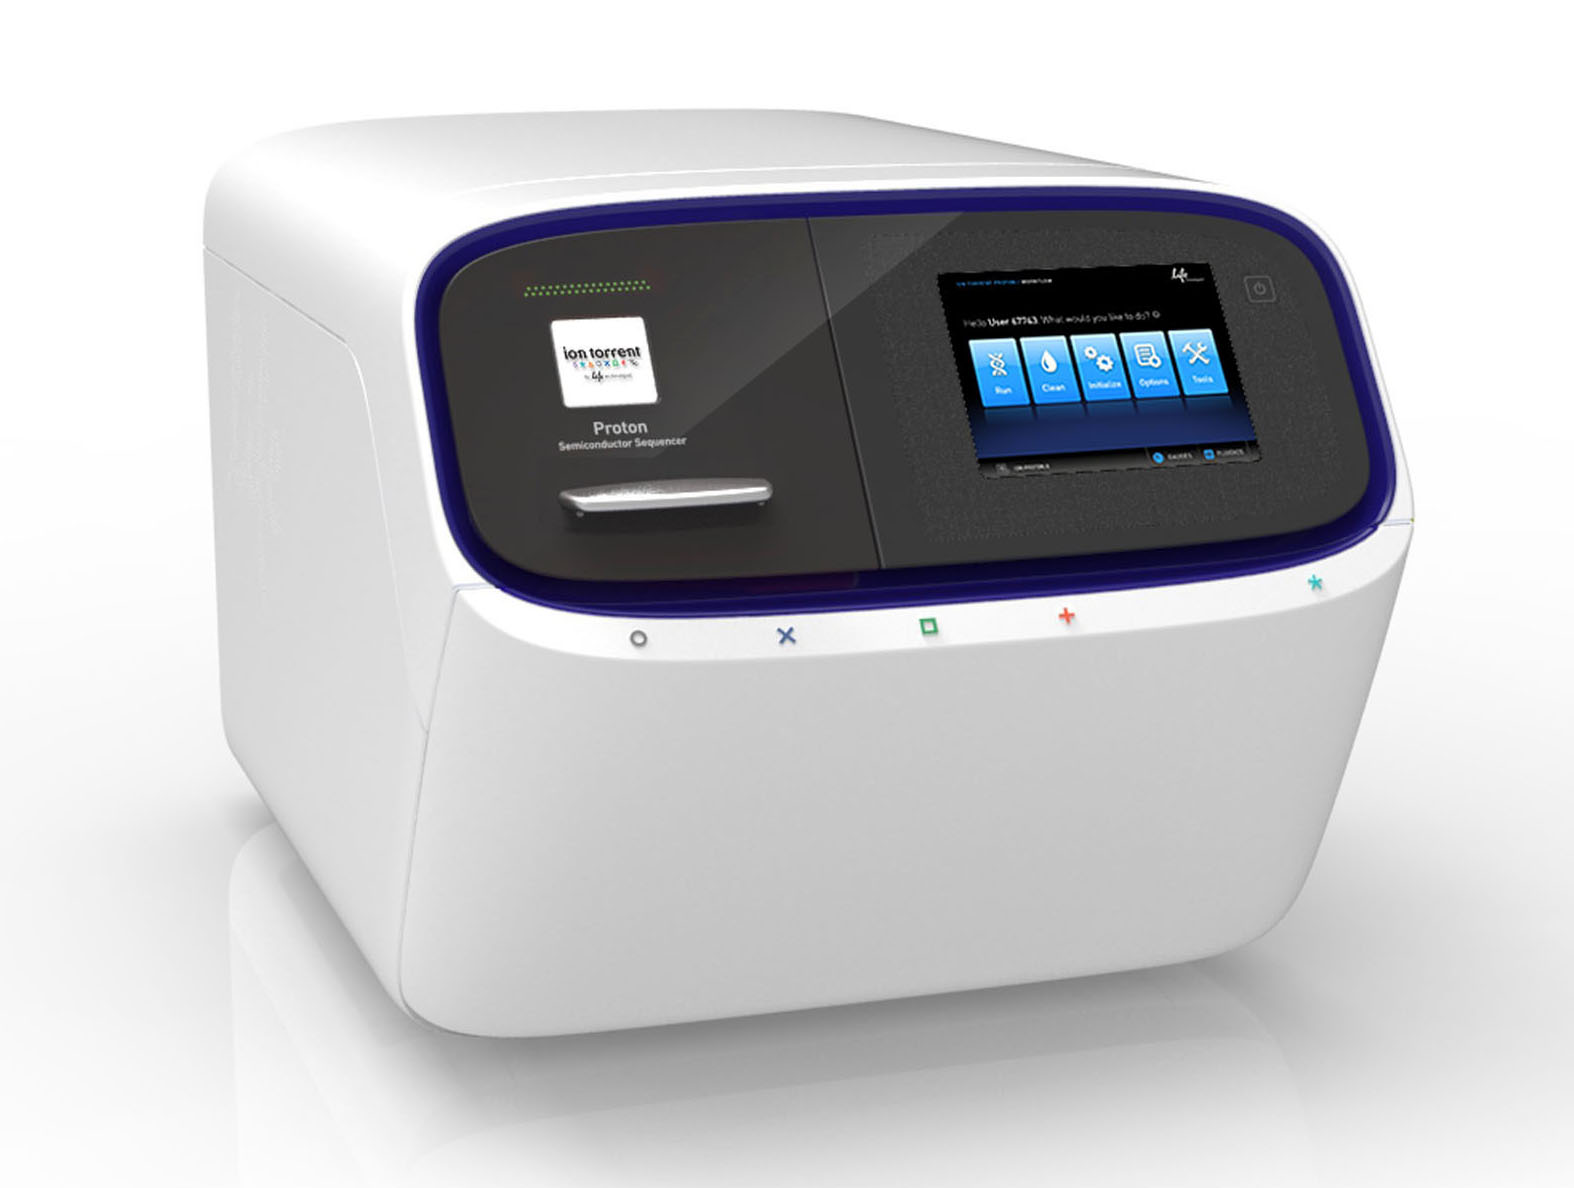 Ion Torrent PROTON (Thermofisher)